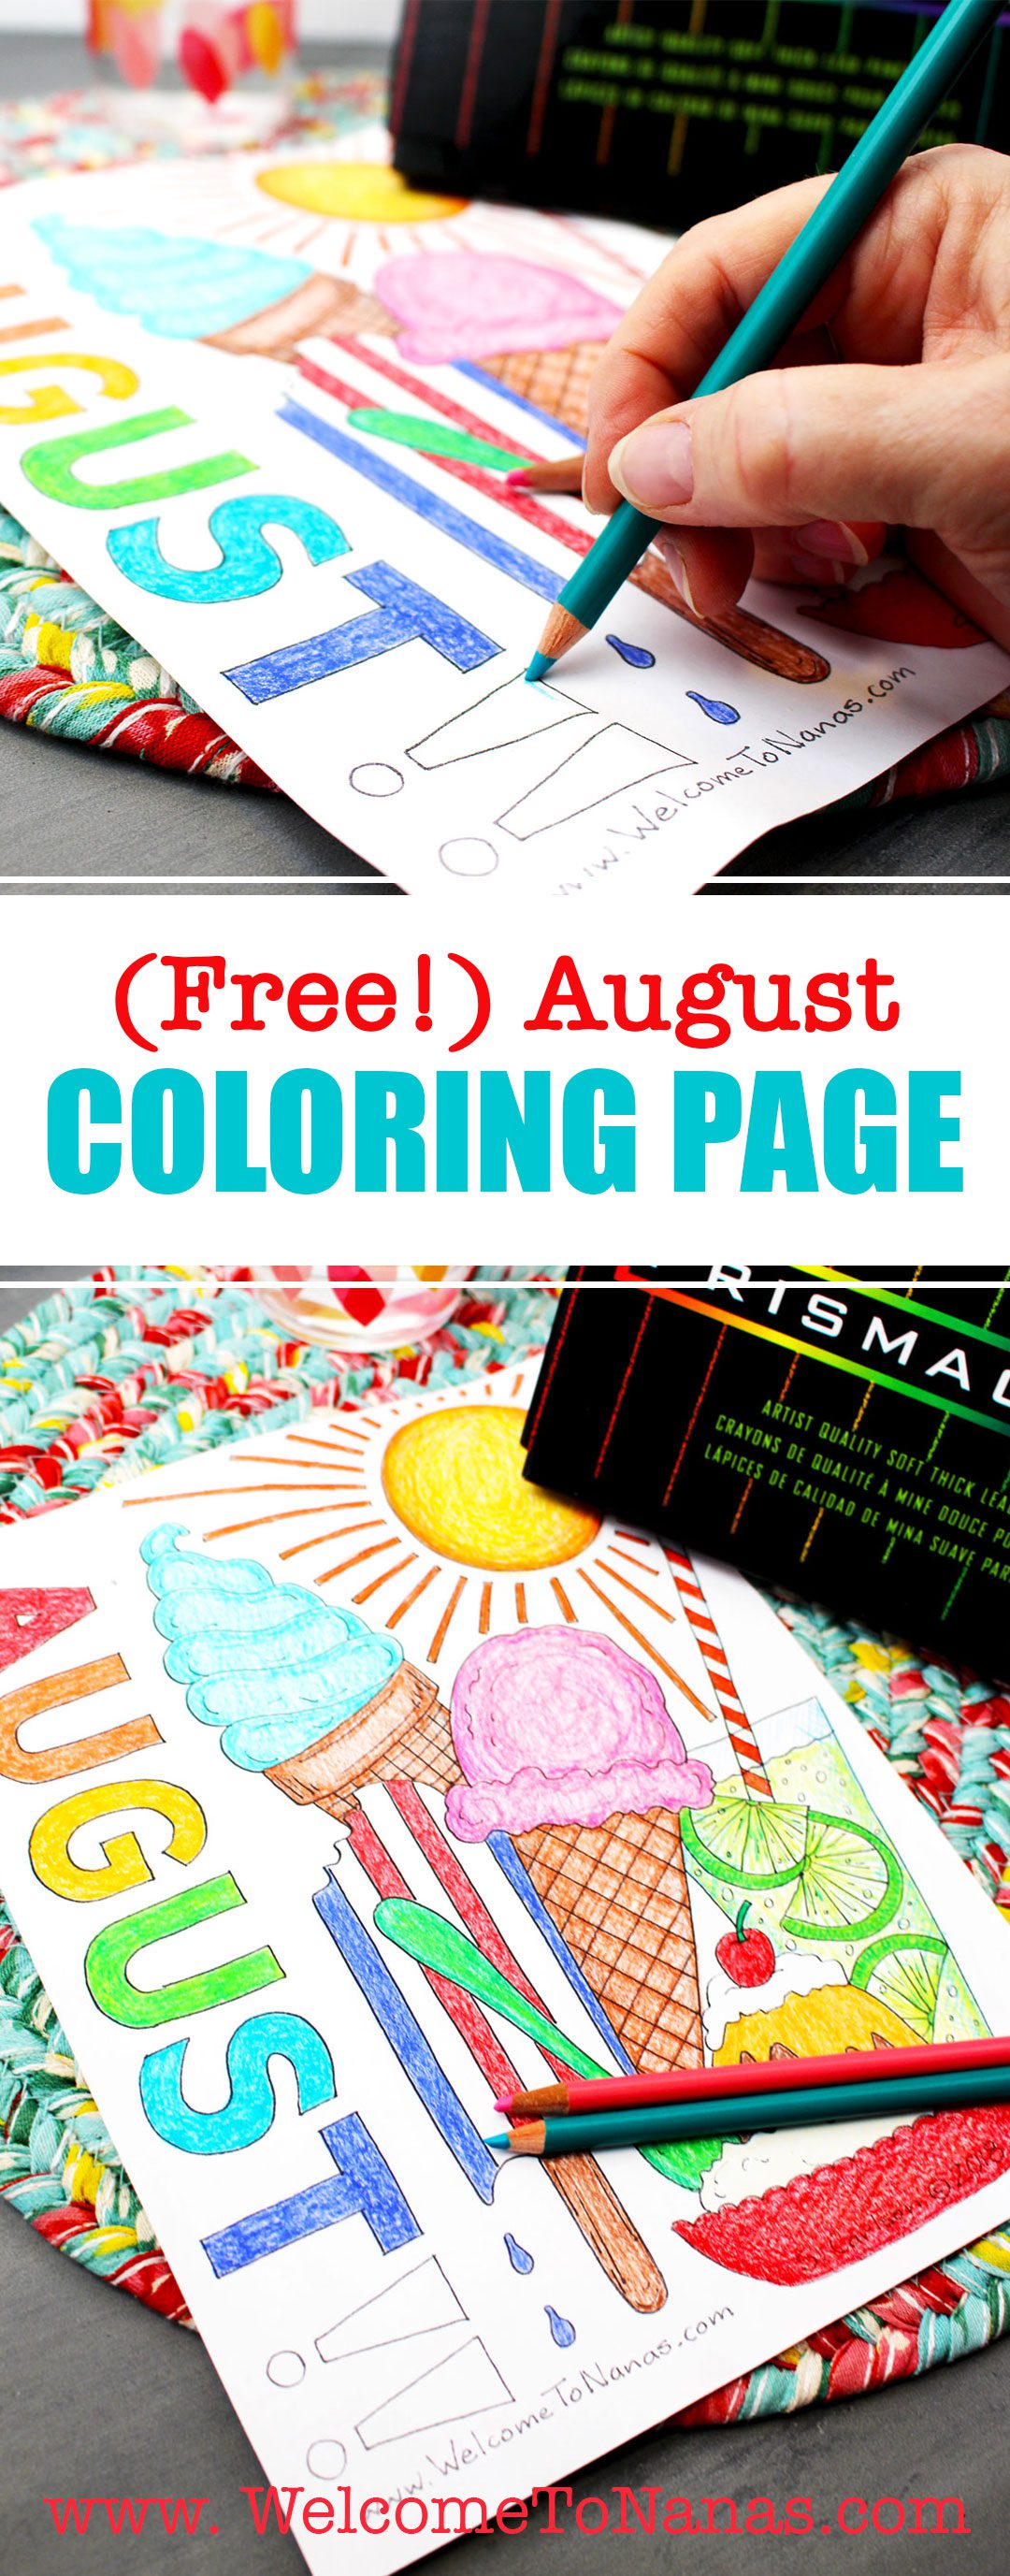 This free August Coloring Page is the printable past time for kids and adults! #AugustColoringPage #FreePrintable #MonthofAugust #ColoringforKids #WelcometoNanas